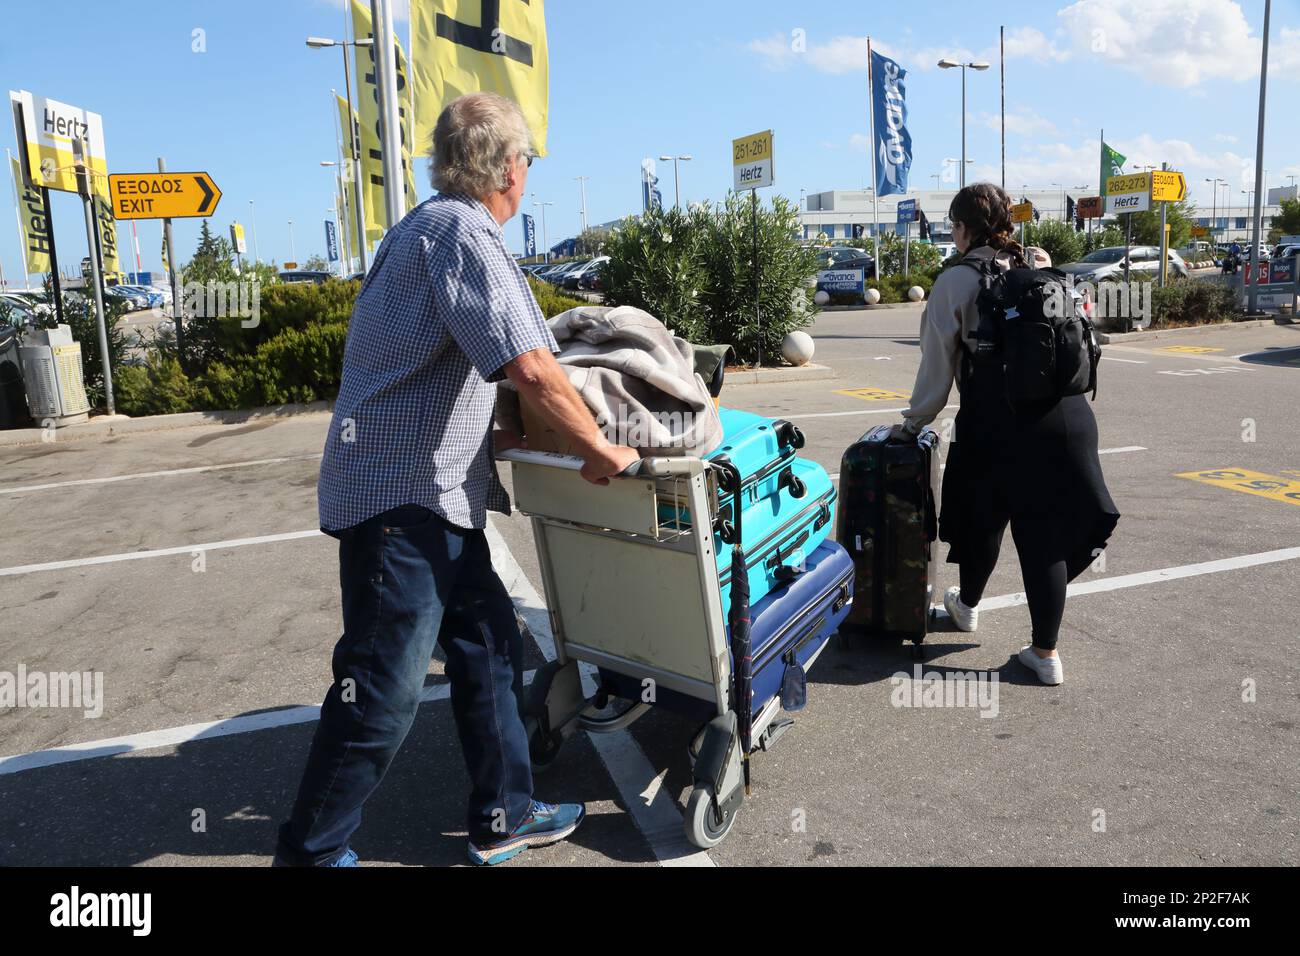 Athens Greece Touristswith Luggage in Airport Trolley at Car Rentals by Athens International Airport (AIA) Eleftherios Venizelos Stock Photo